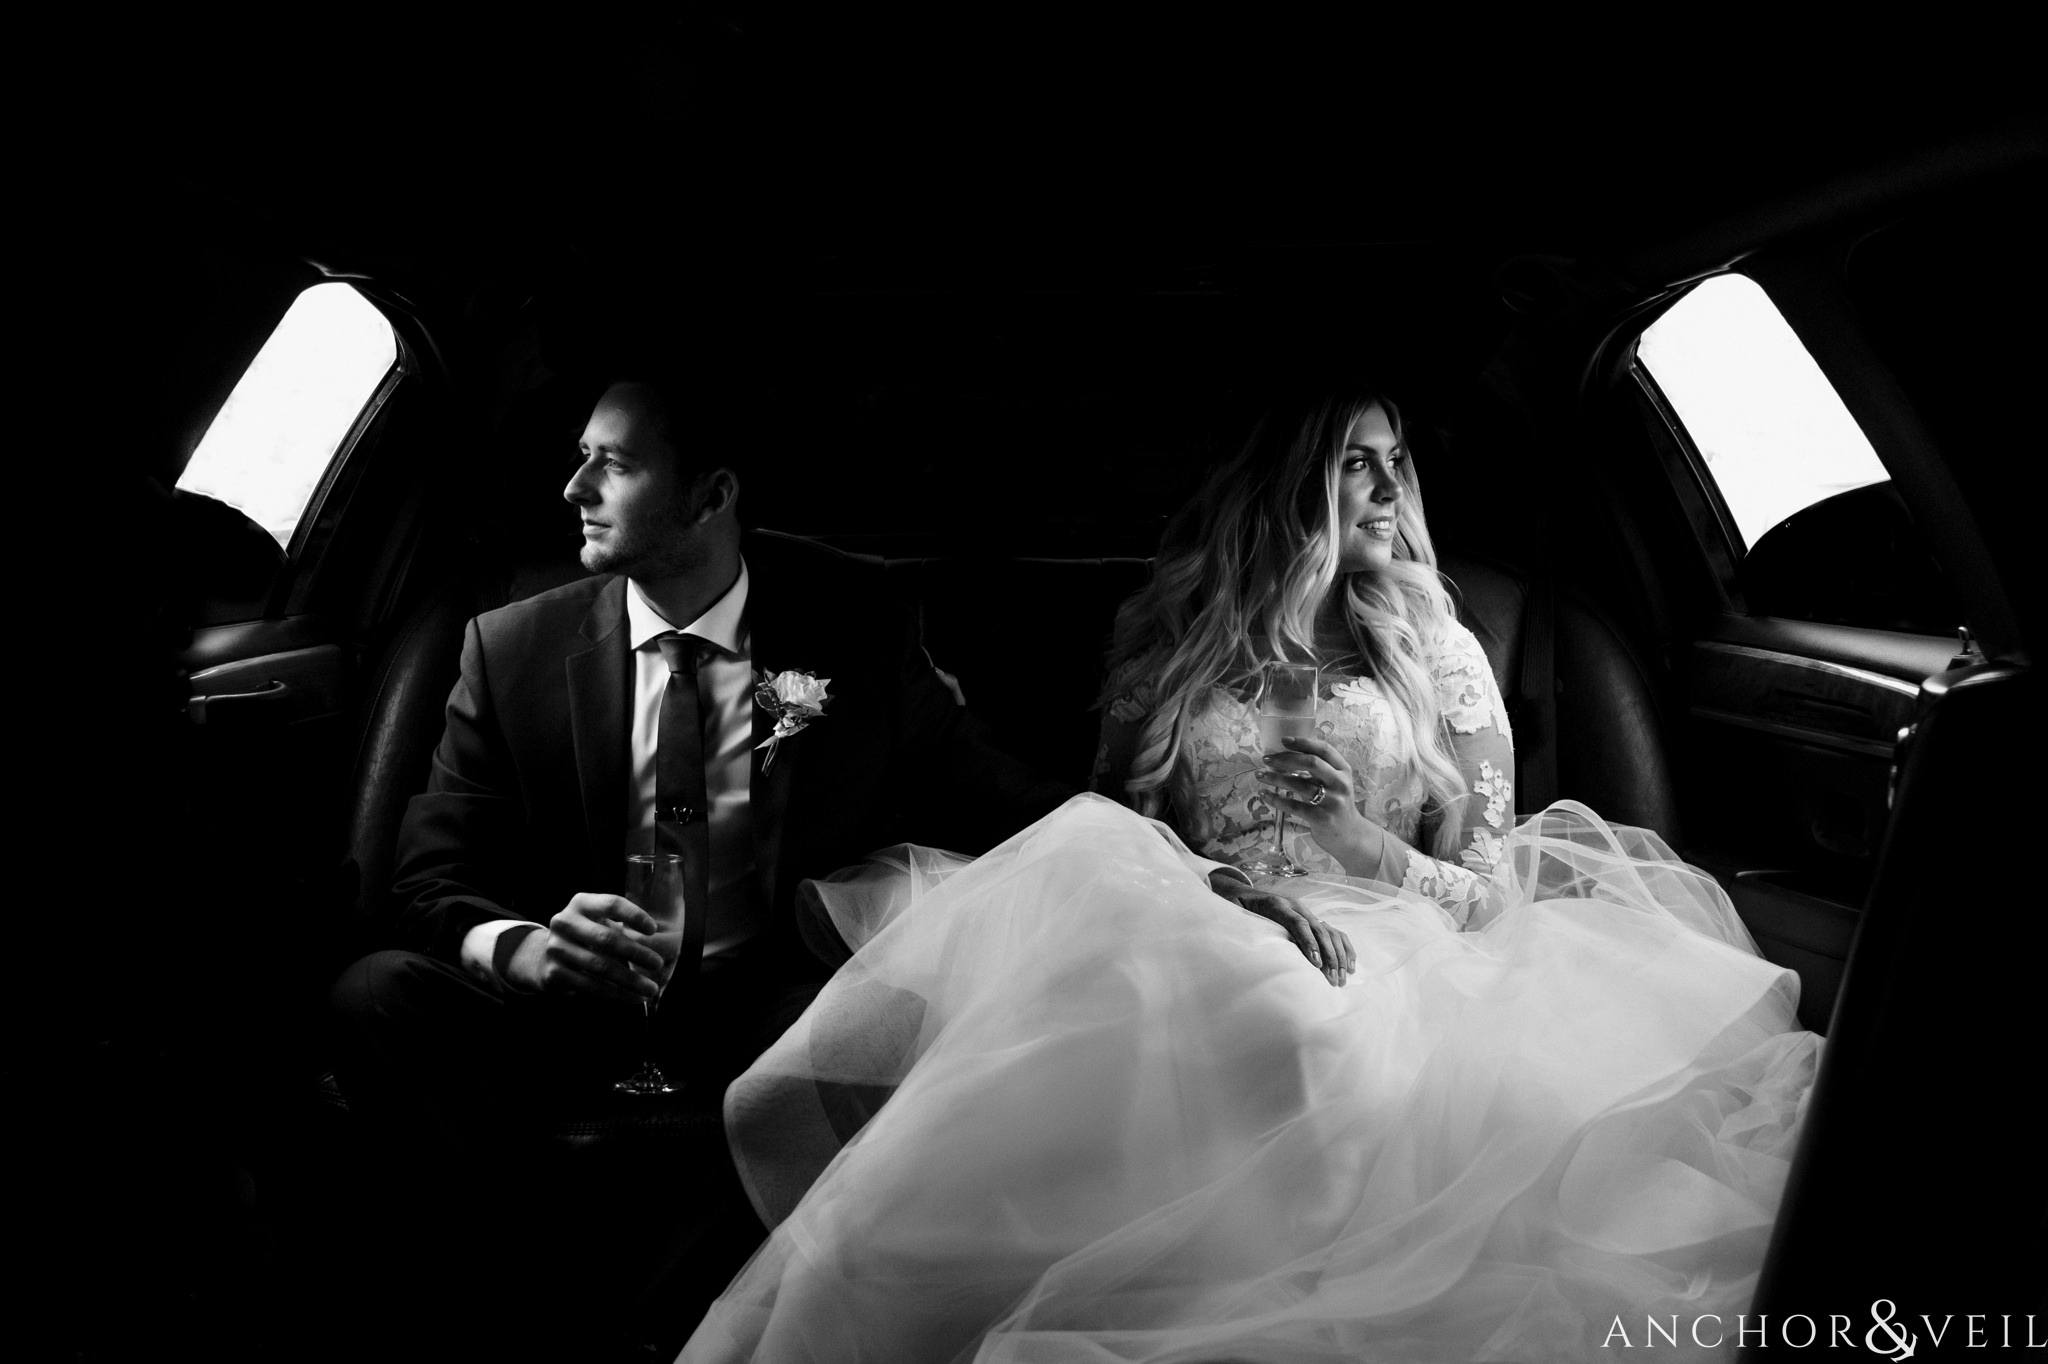 bride and groom sitting in the limo together